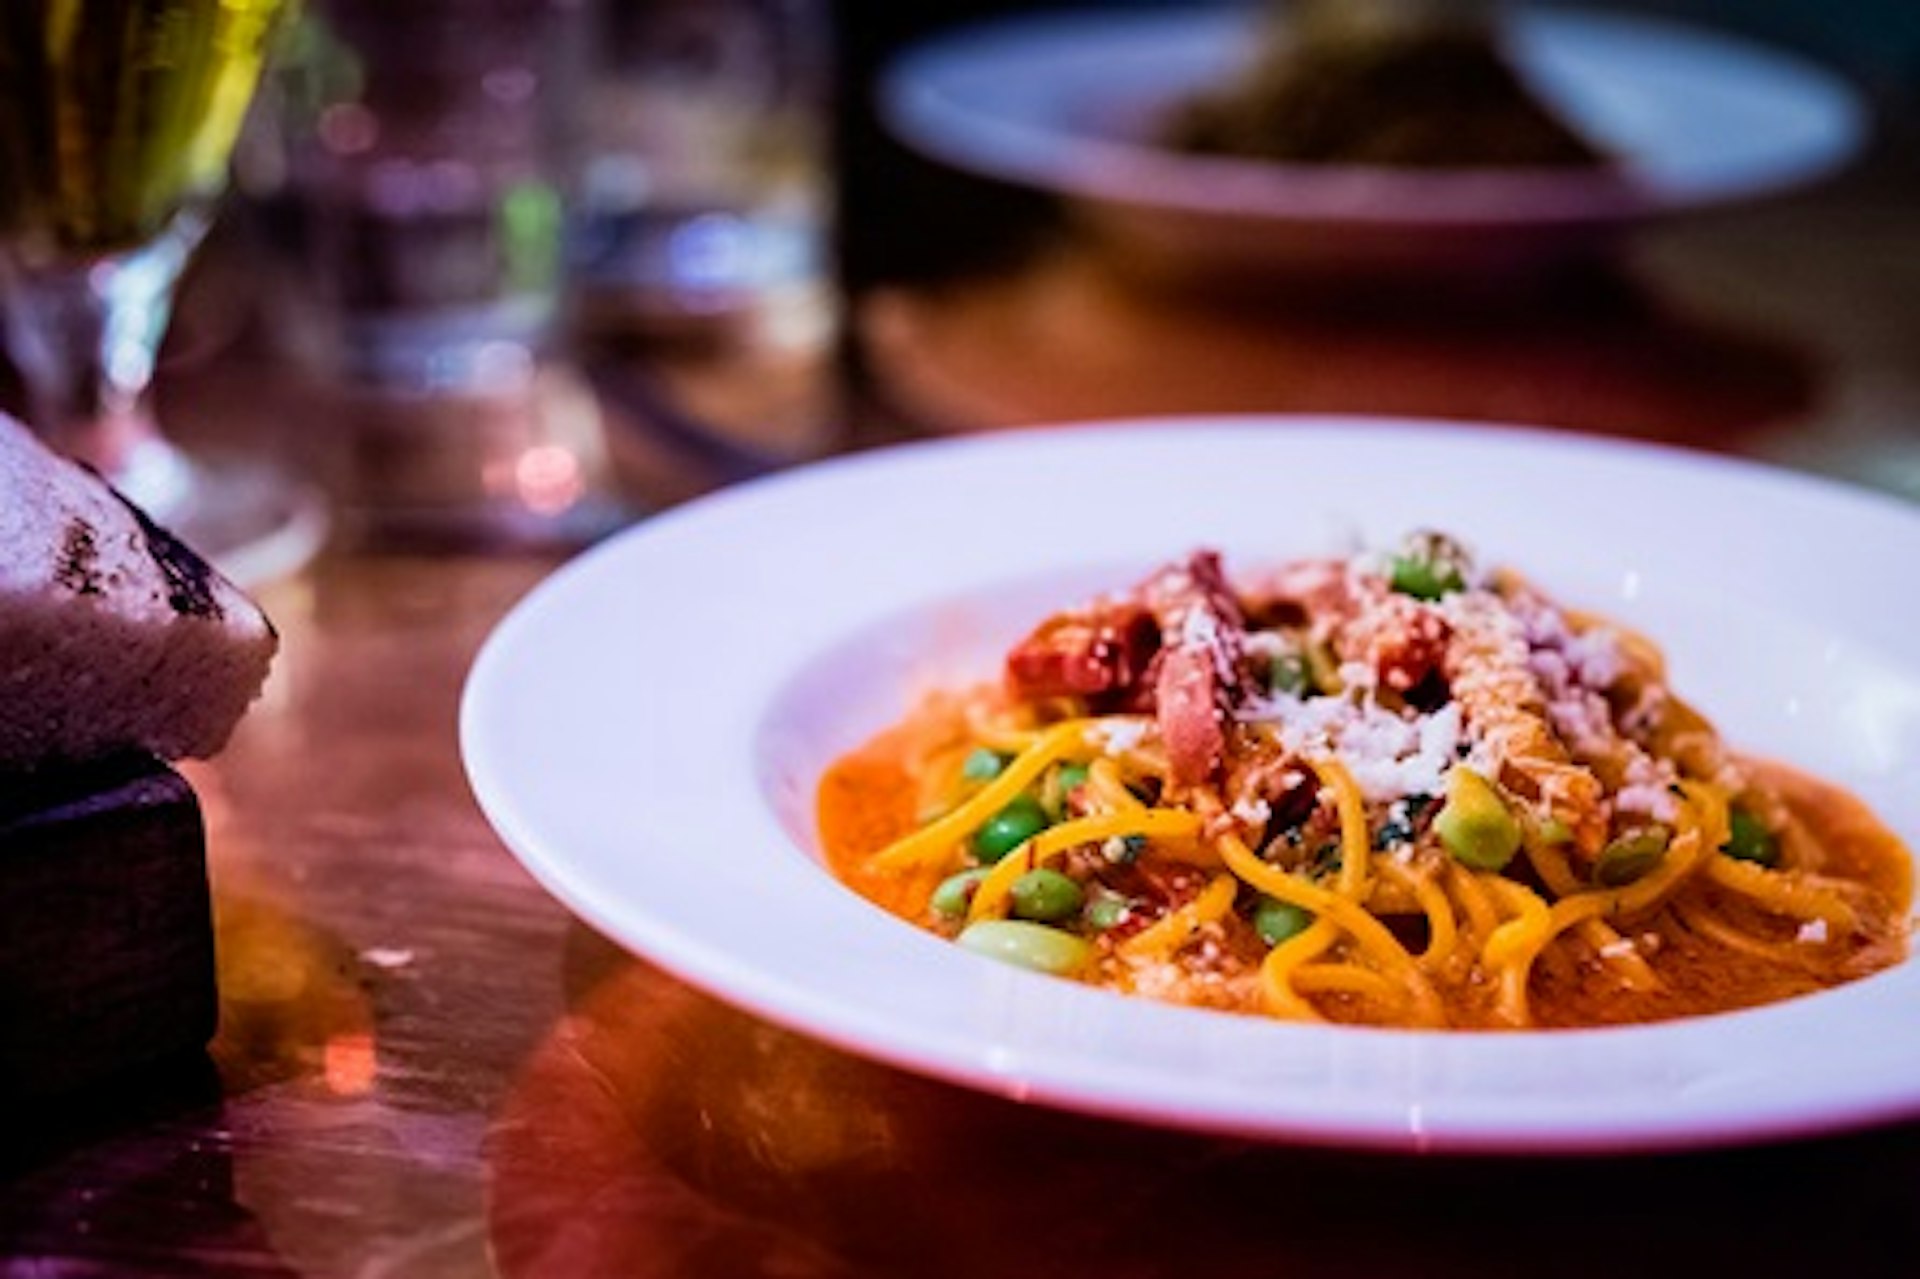 Three Course Italian Meal for Two with Prosecco at Michelin Recommended Mele e Pere, Soho 1